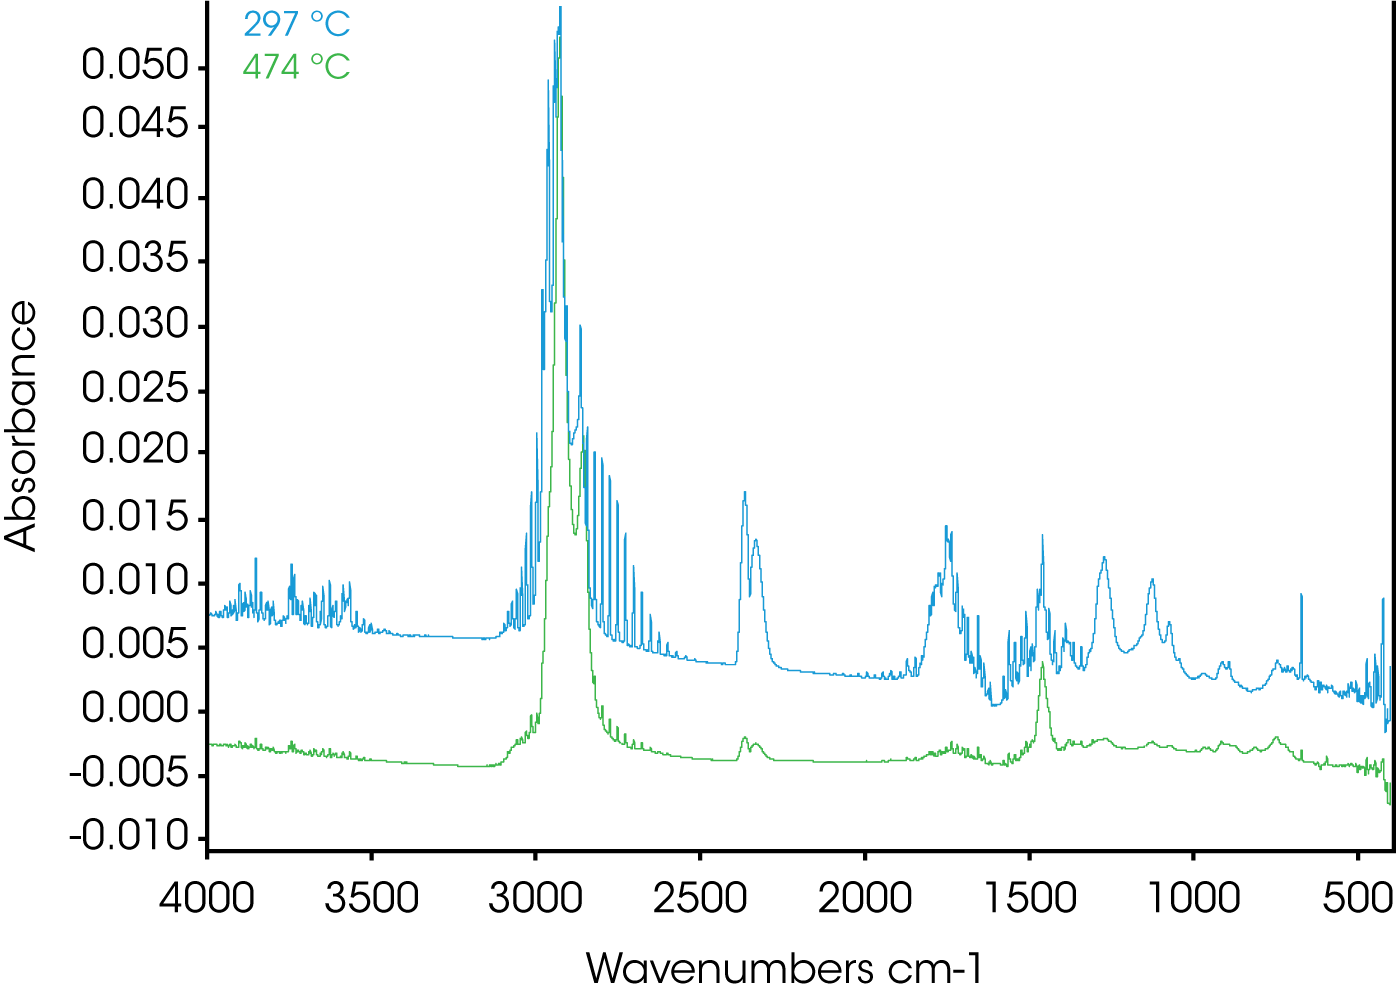 Figure 12. FTIR Spectra at 297 and 474 °C